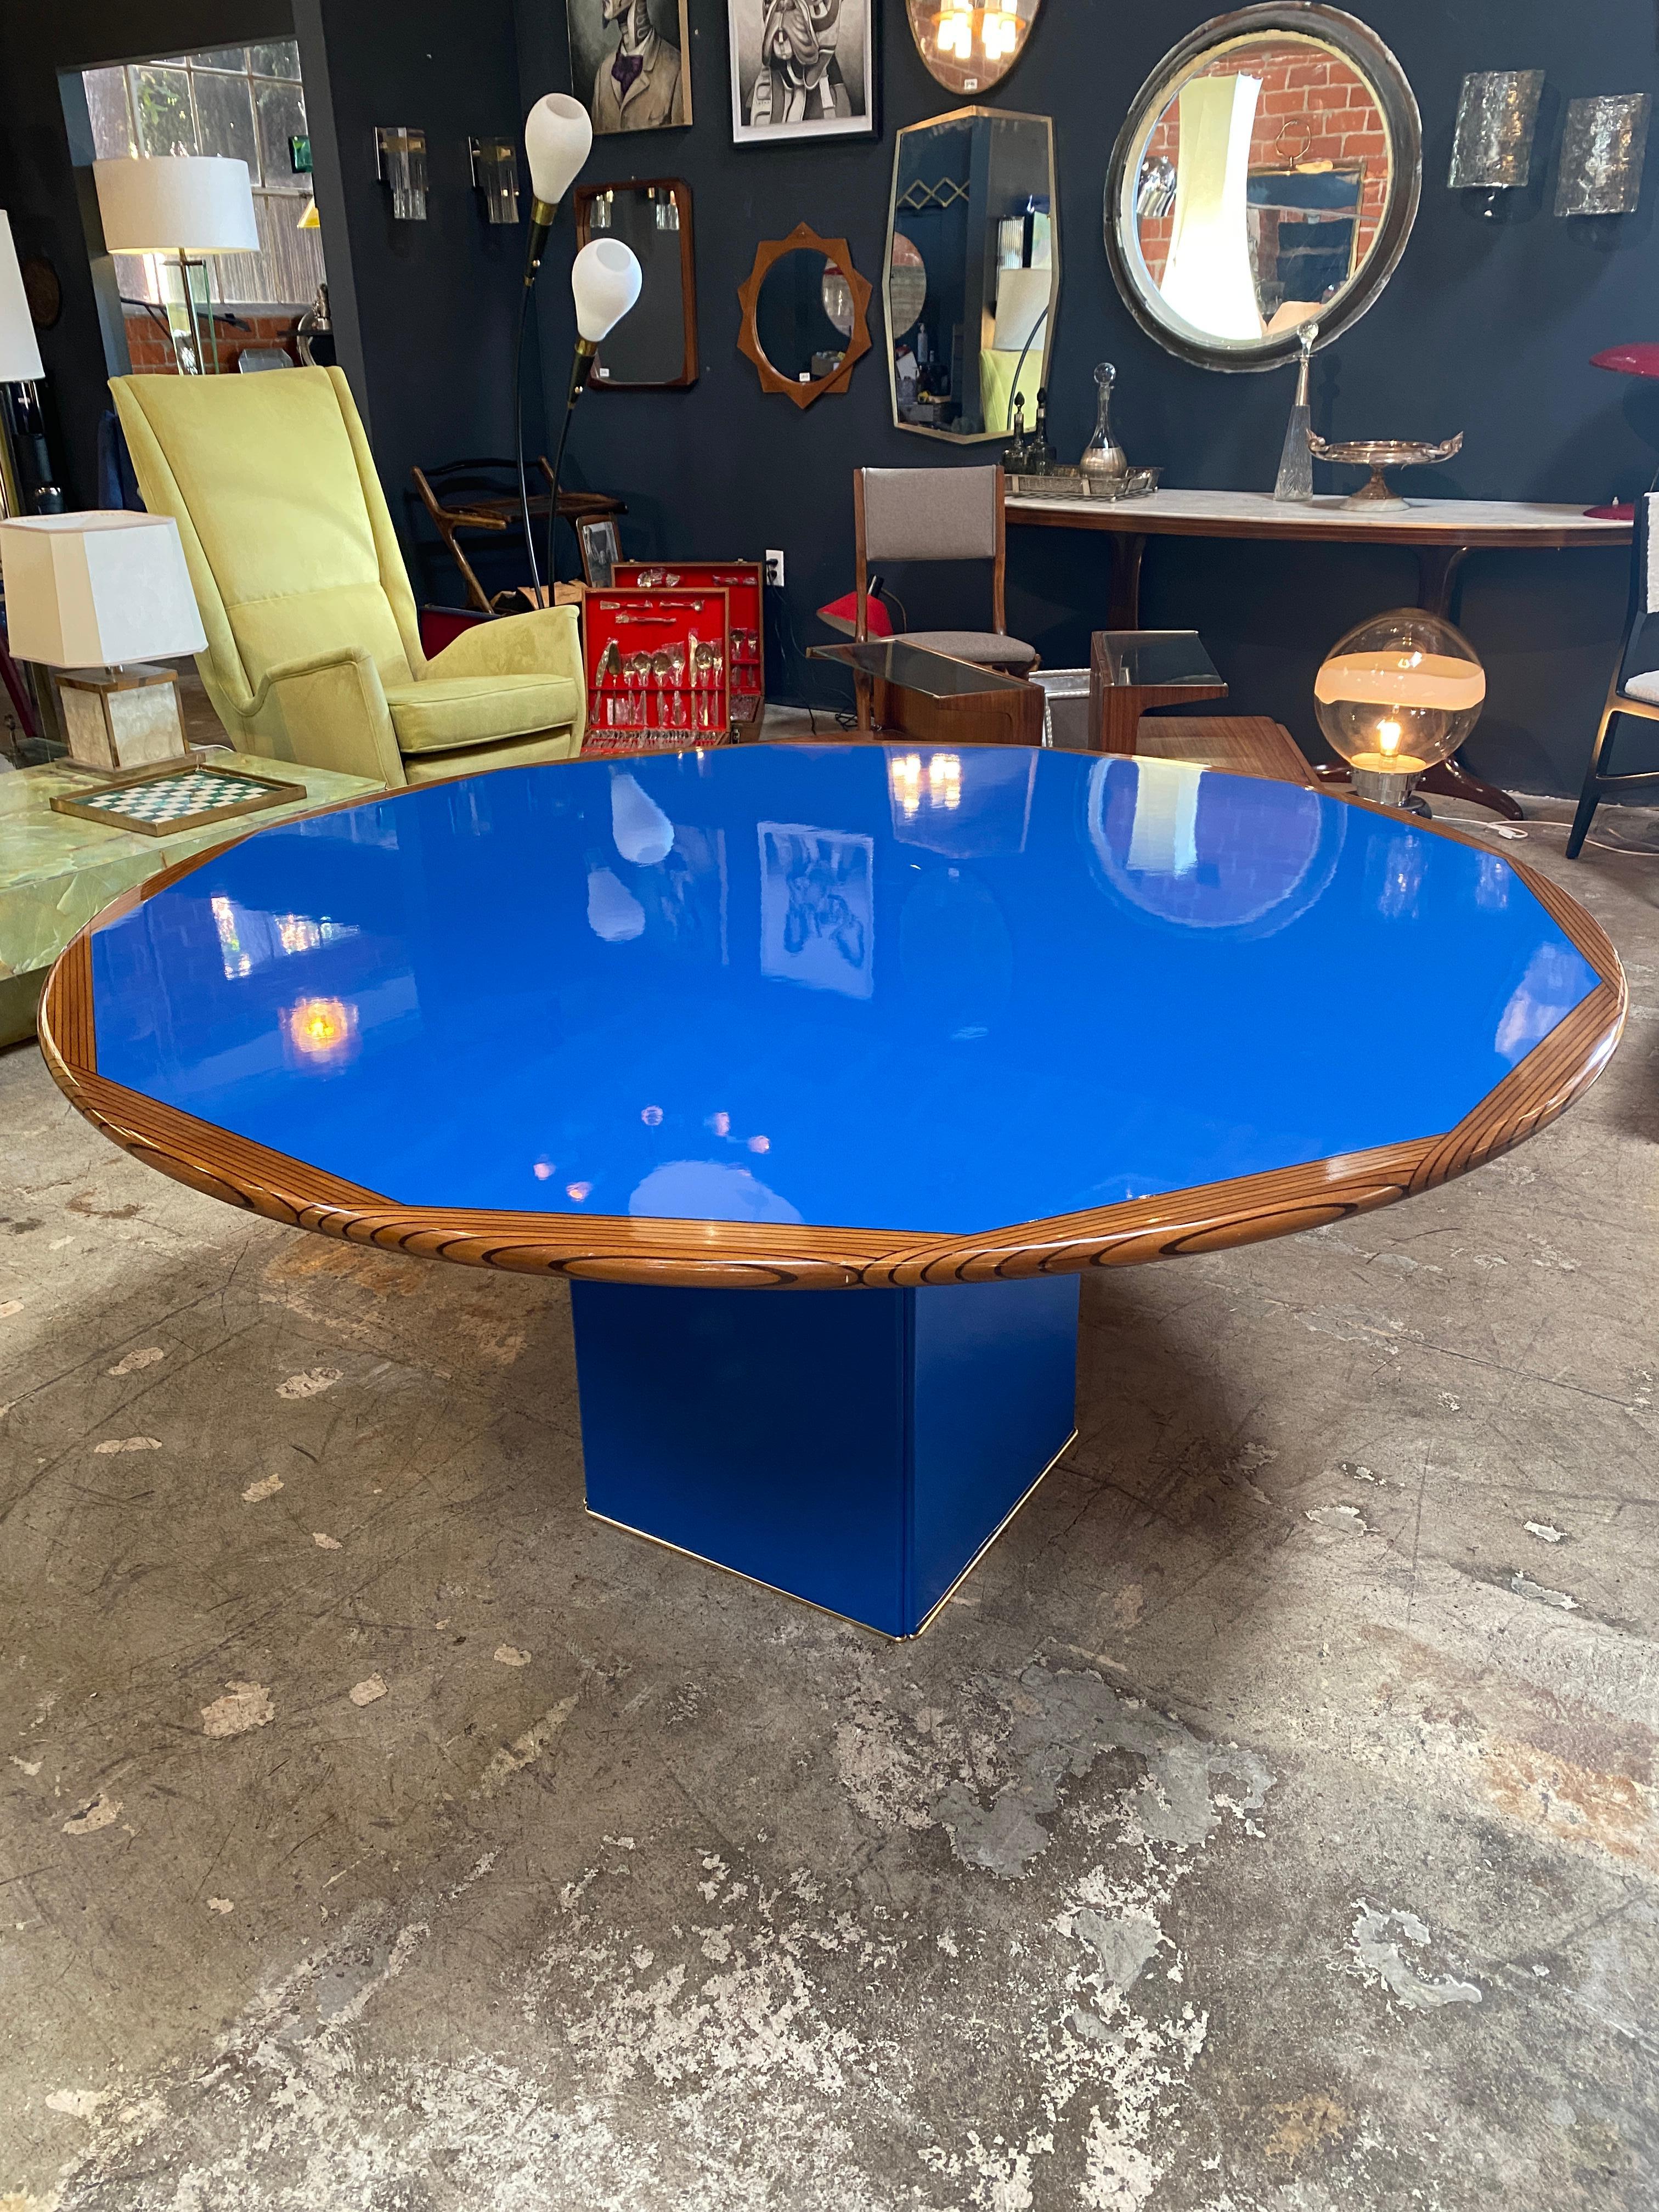 Afra & Tobia Scarpa round dining table.
Fruitwood lacquered blue.
Rectangular base dimension: 16